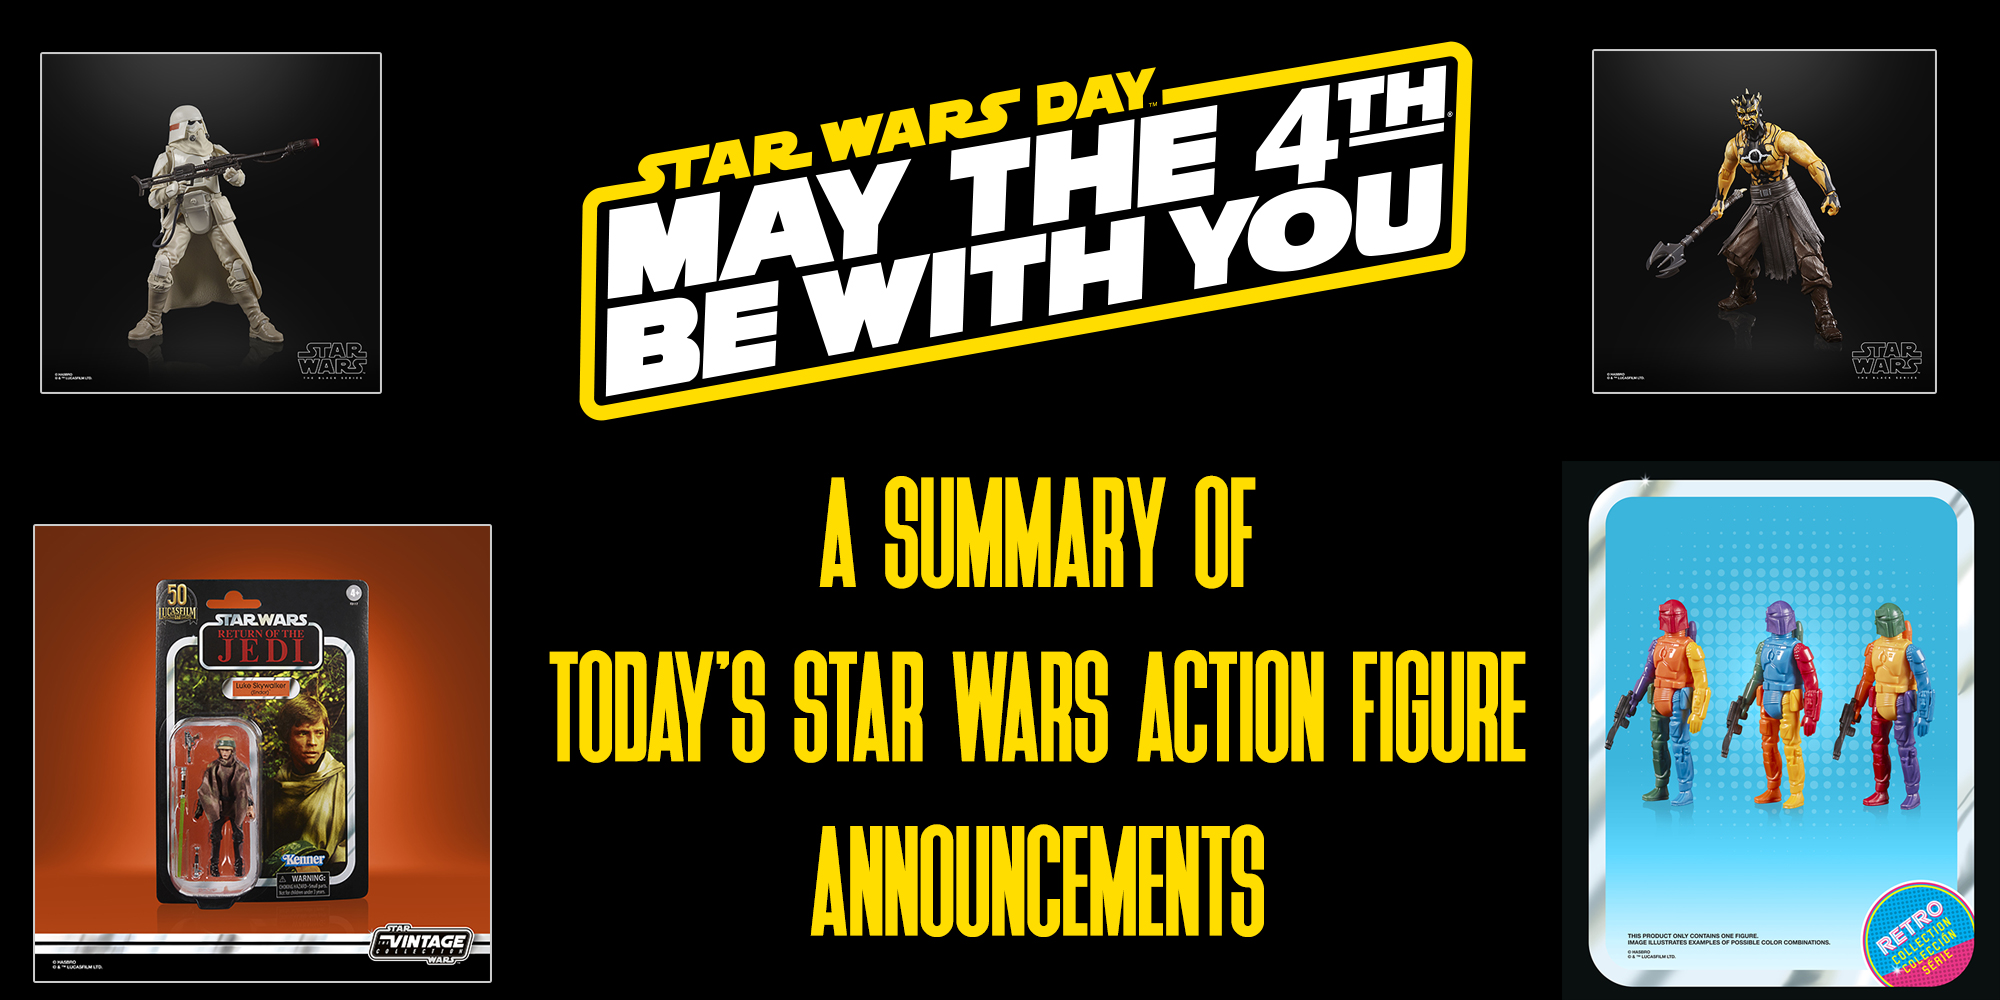 May The 4th 2021 Star Wars Action Figure Announcements!